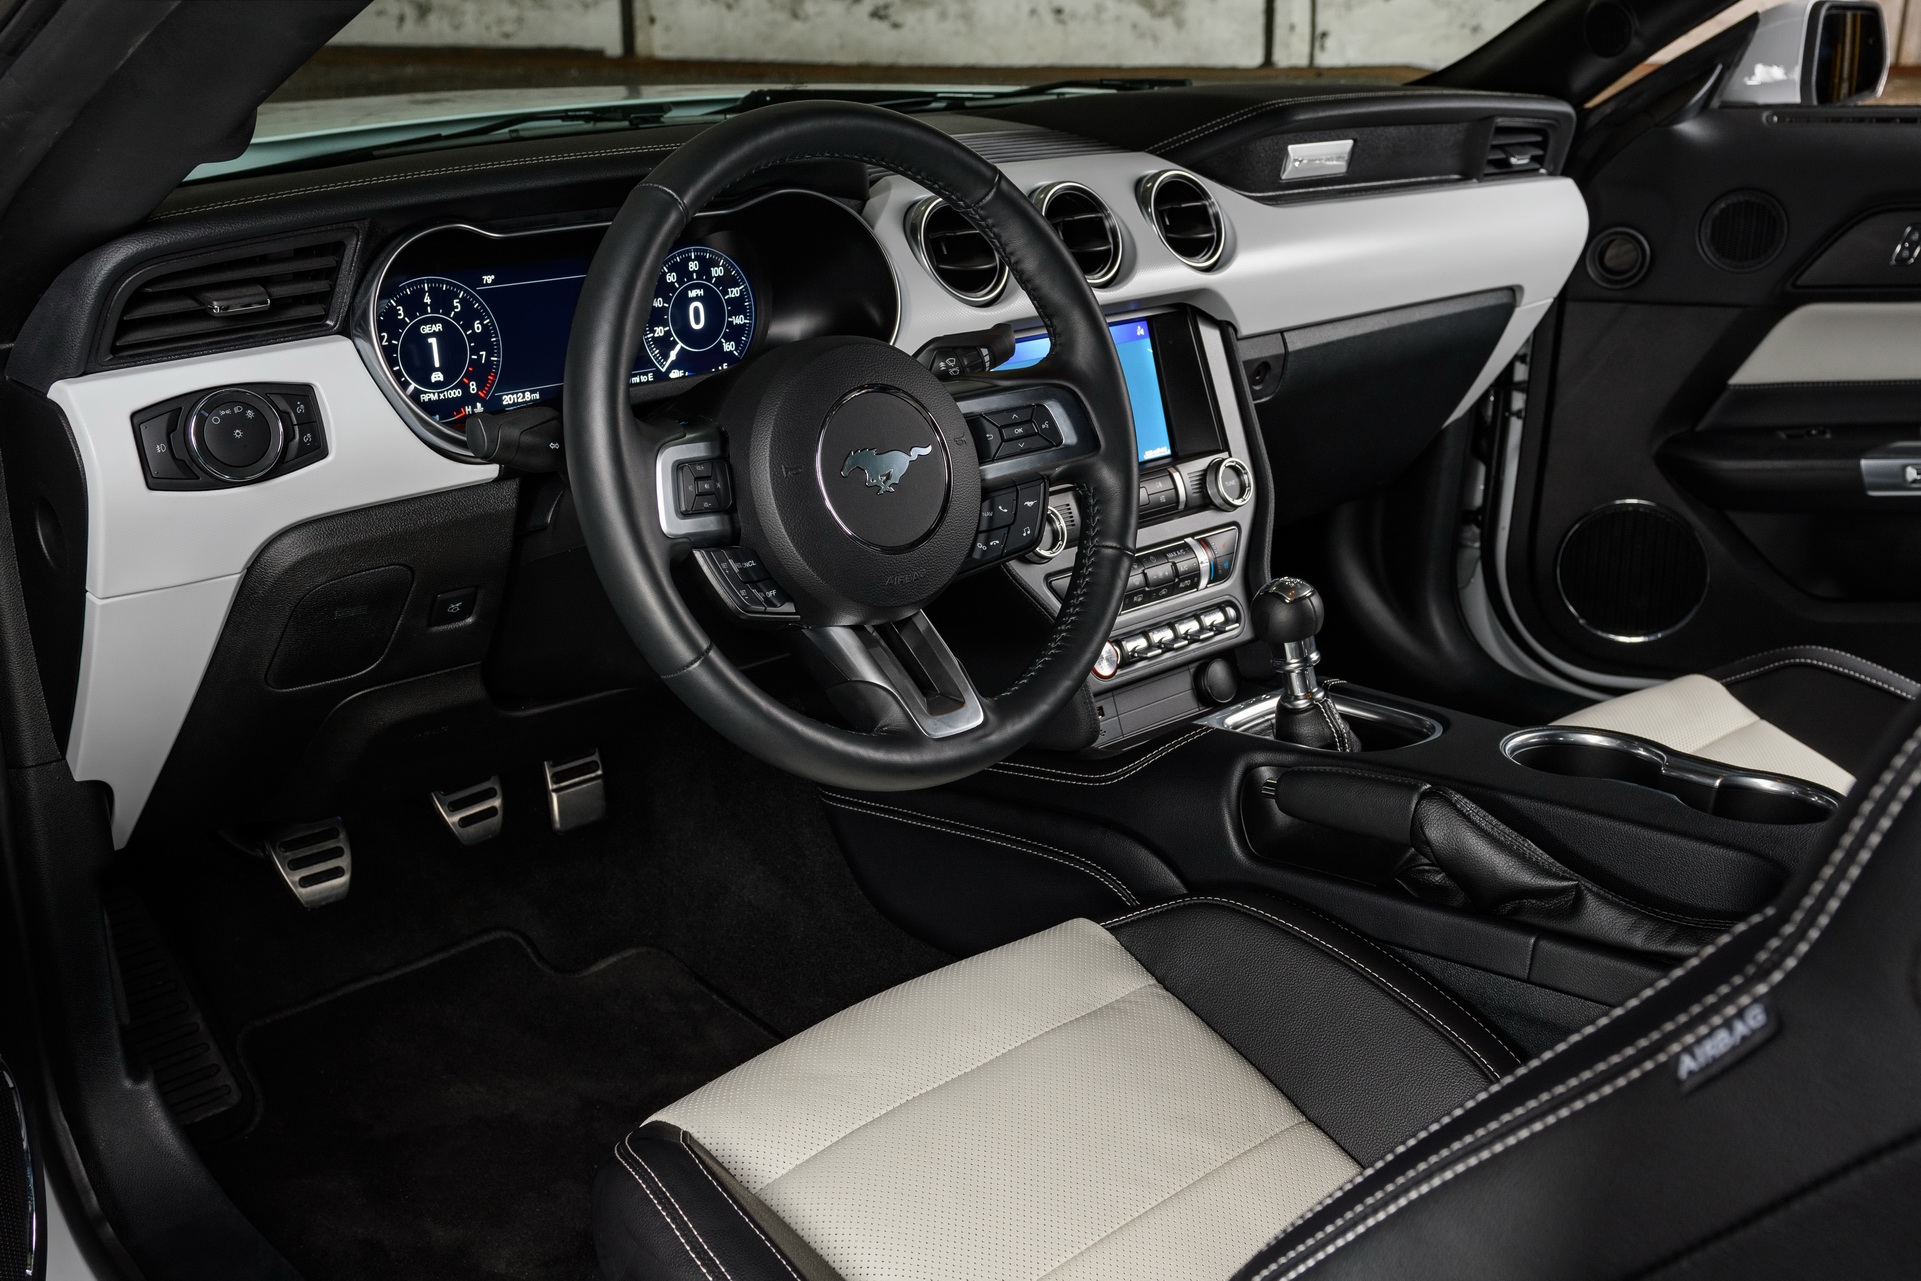 2022 Ford Mustang Ice White Appearance Package Interior Wallpapers #15 of 24